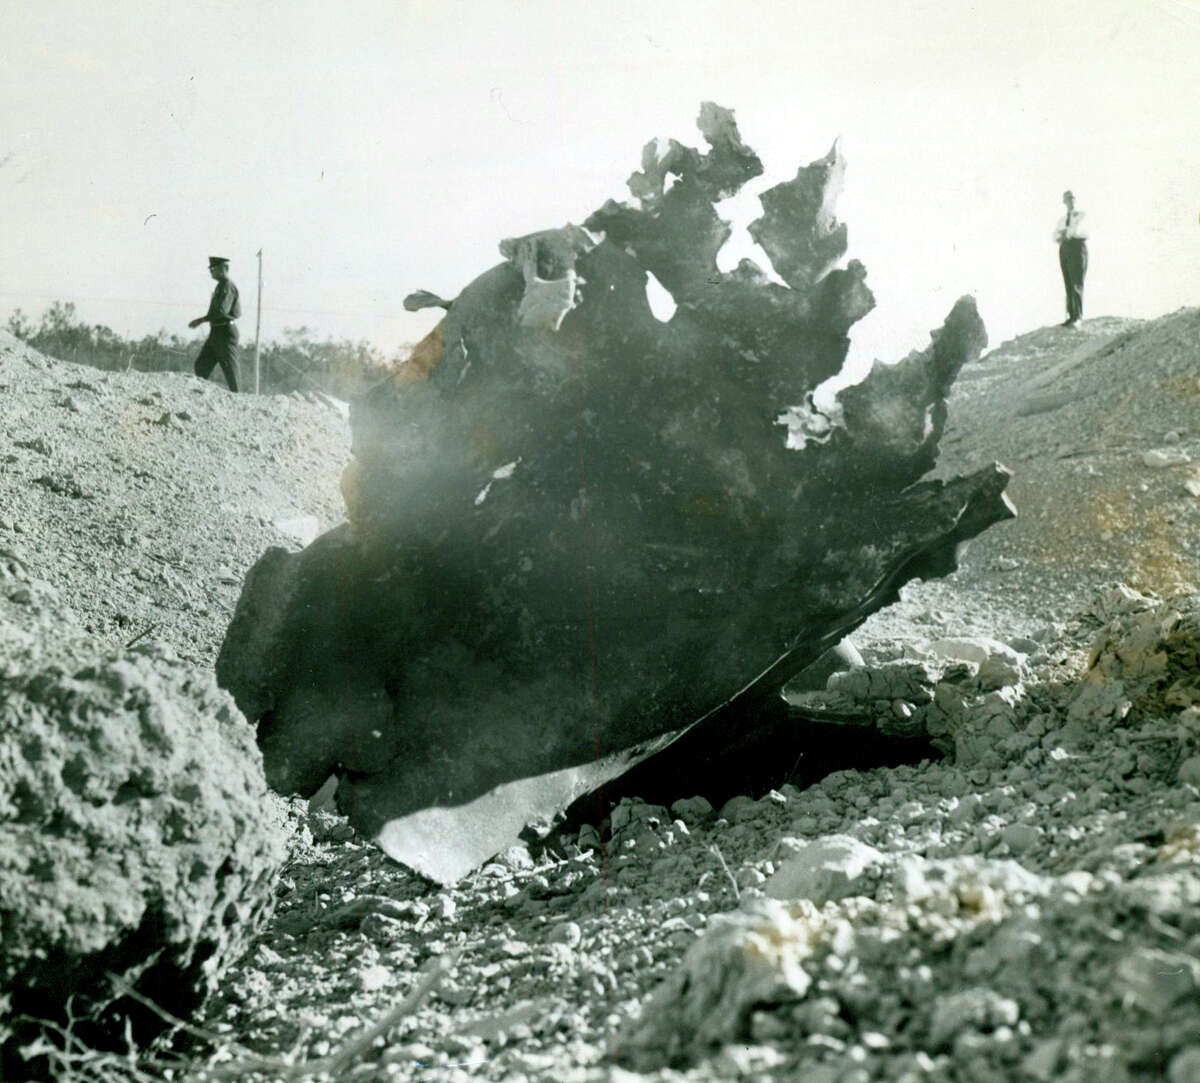 A piece of steel is left after a explosion at Medina Air Force Base that left a crater 25 feet deep and 60 yards wide on Nov. 13, 1963.